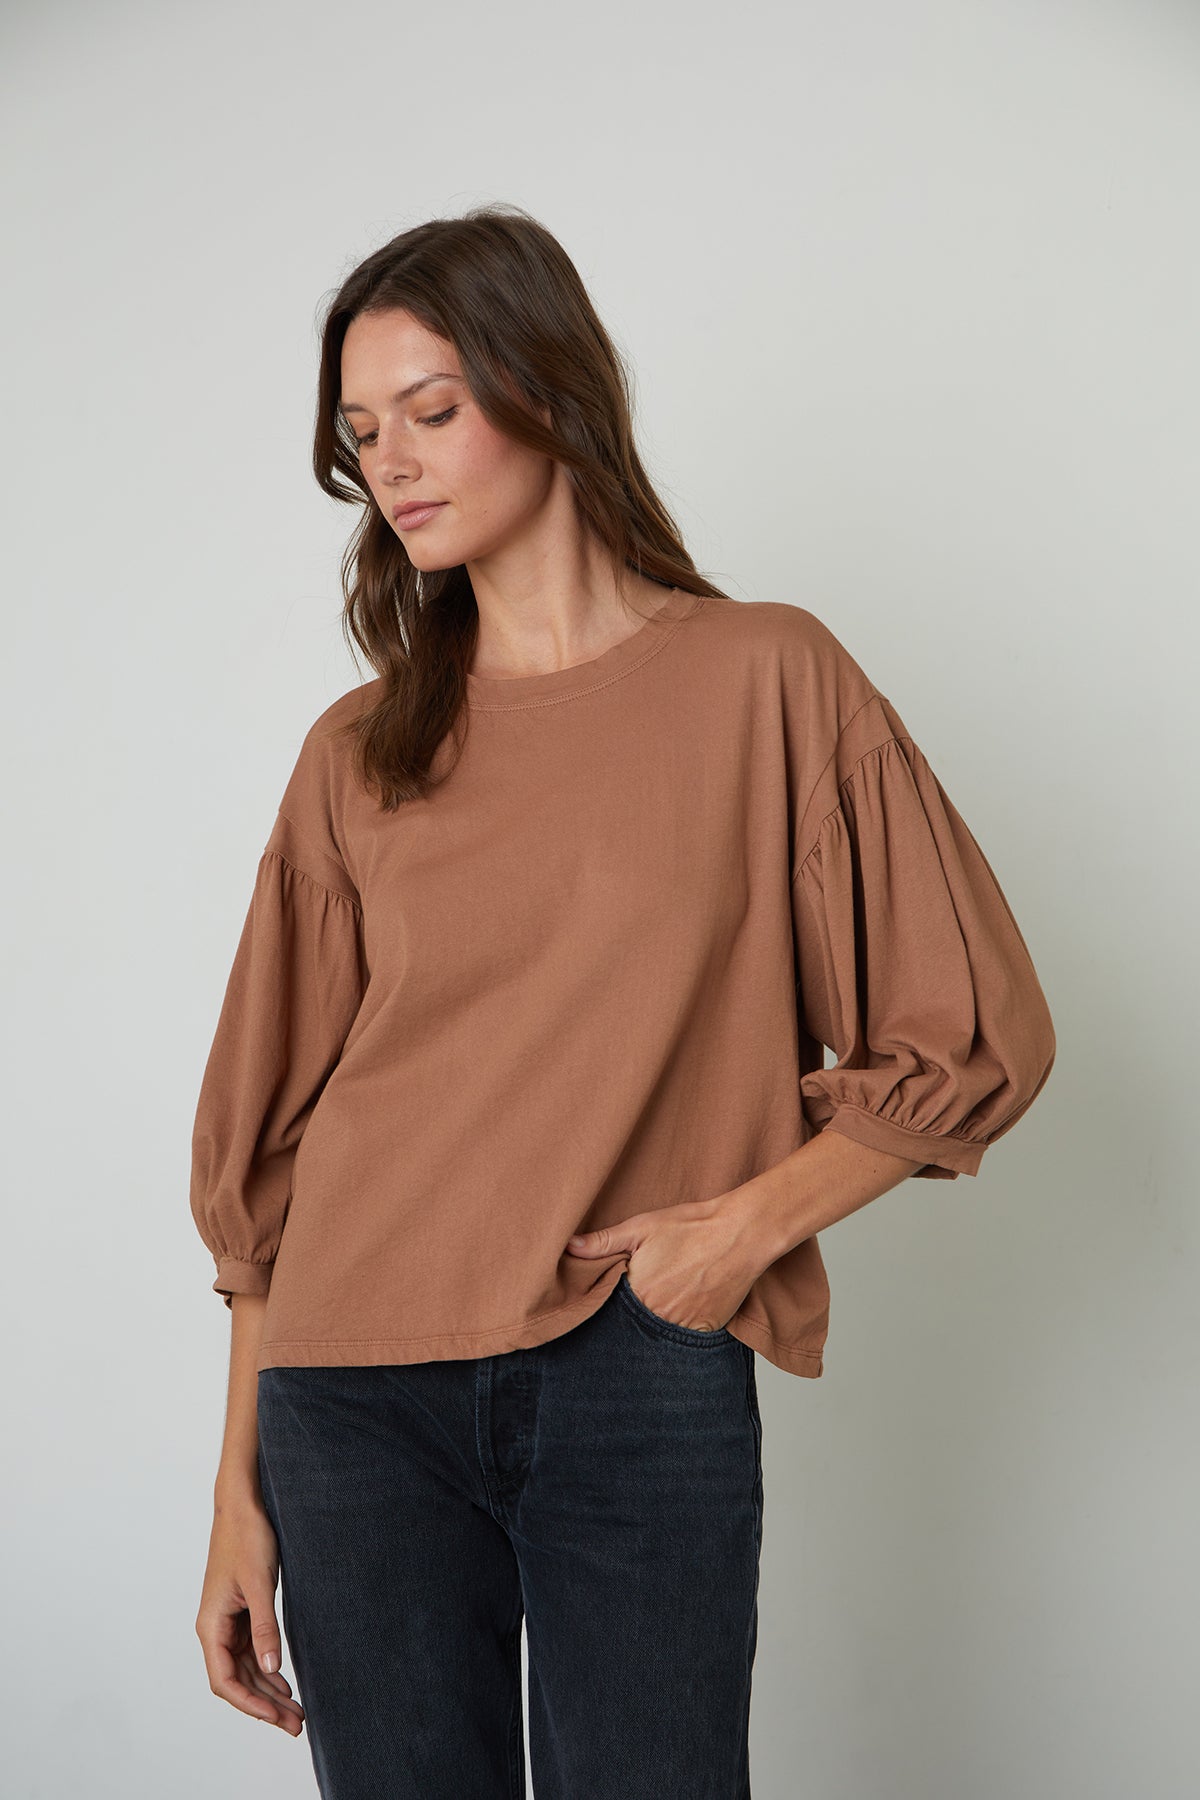   The PRUDY 3/4 SLEEVE TEE in tan, by Velvet by Graham & Spencer, adds volume to your outfit. 